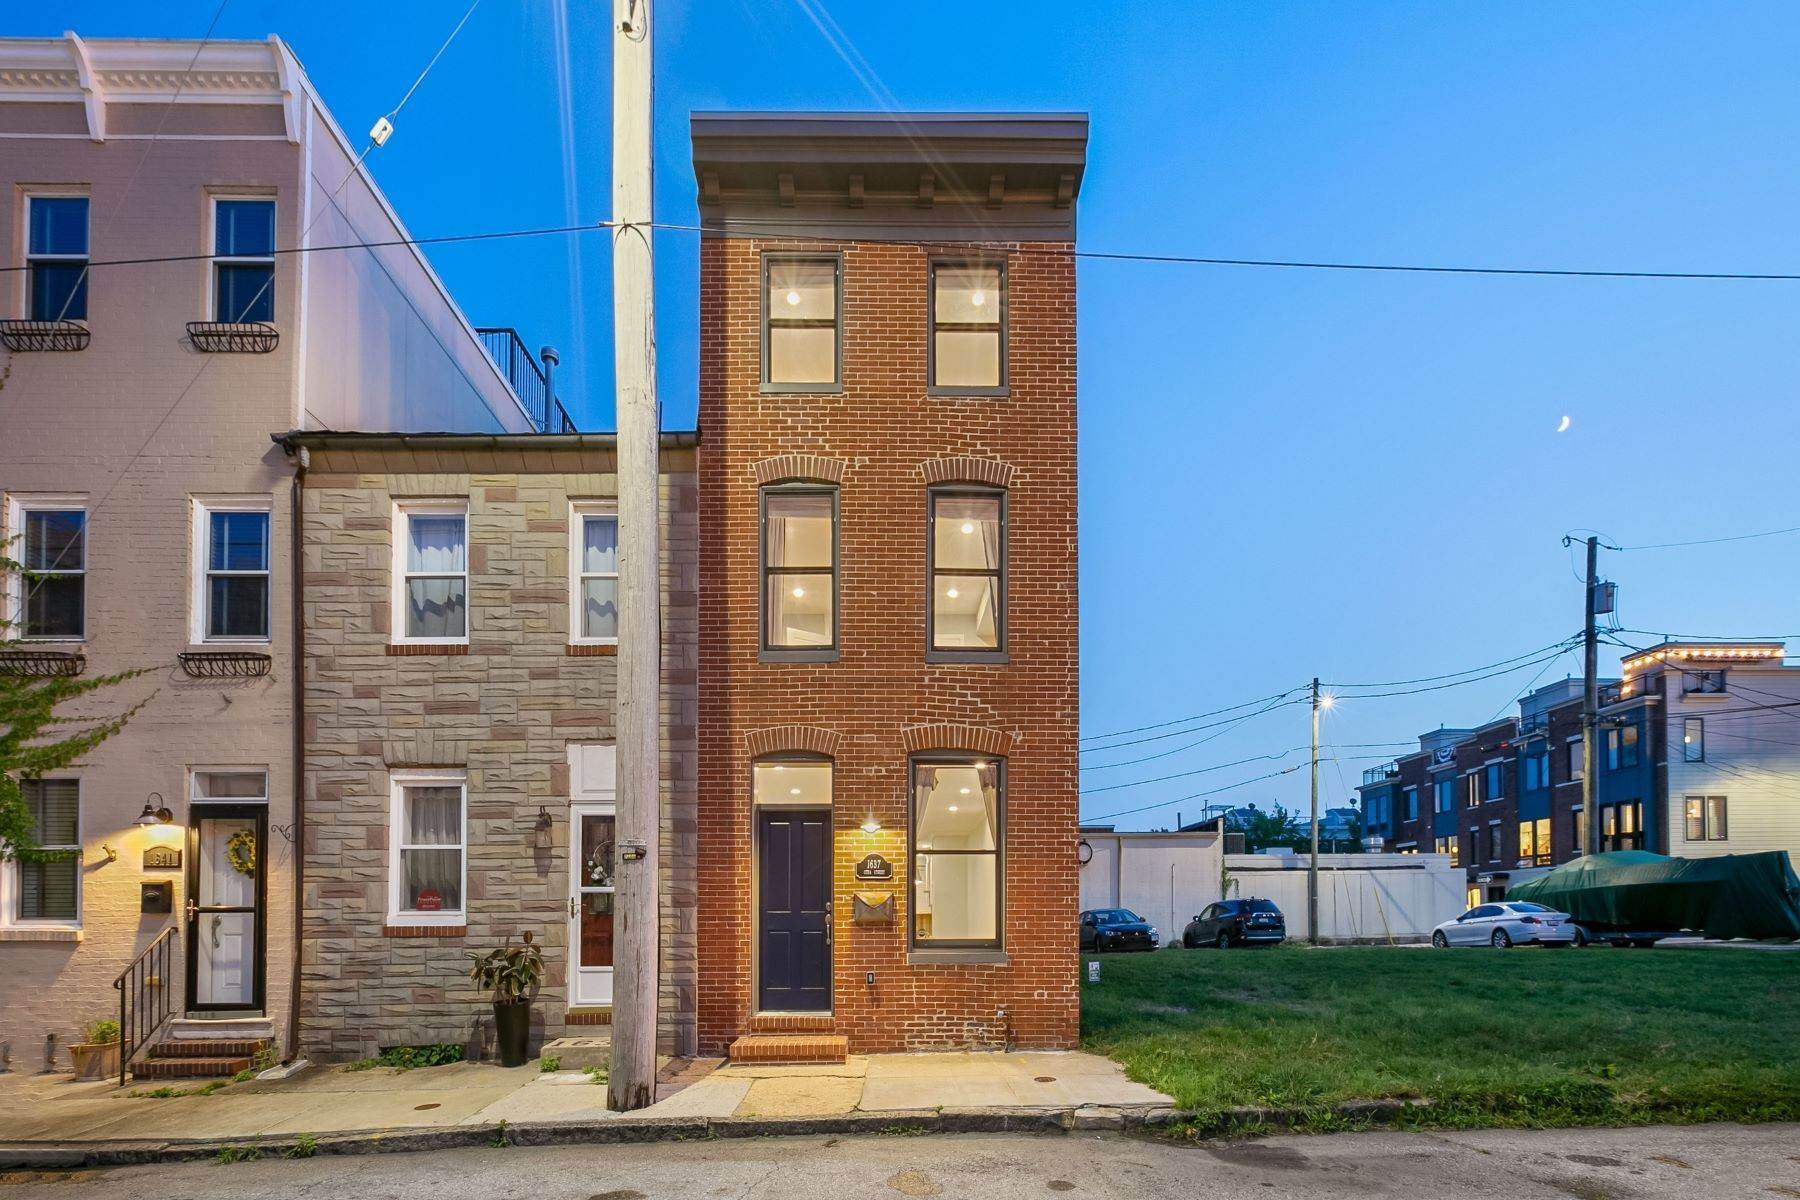 6. Townhouse at Locust Point Townhome 1637 Cuba Street Baltimore, Maryland 21230 United States